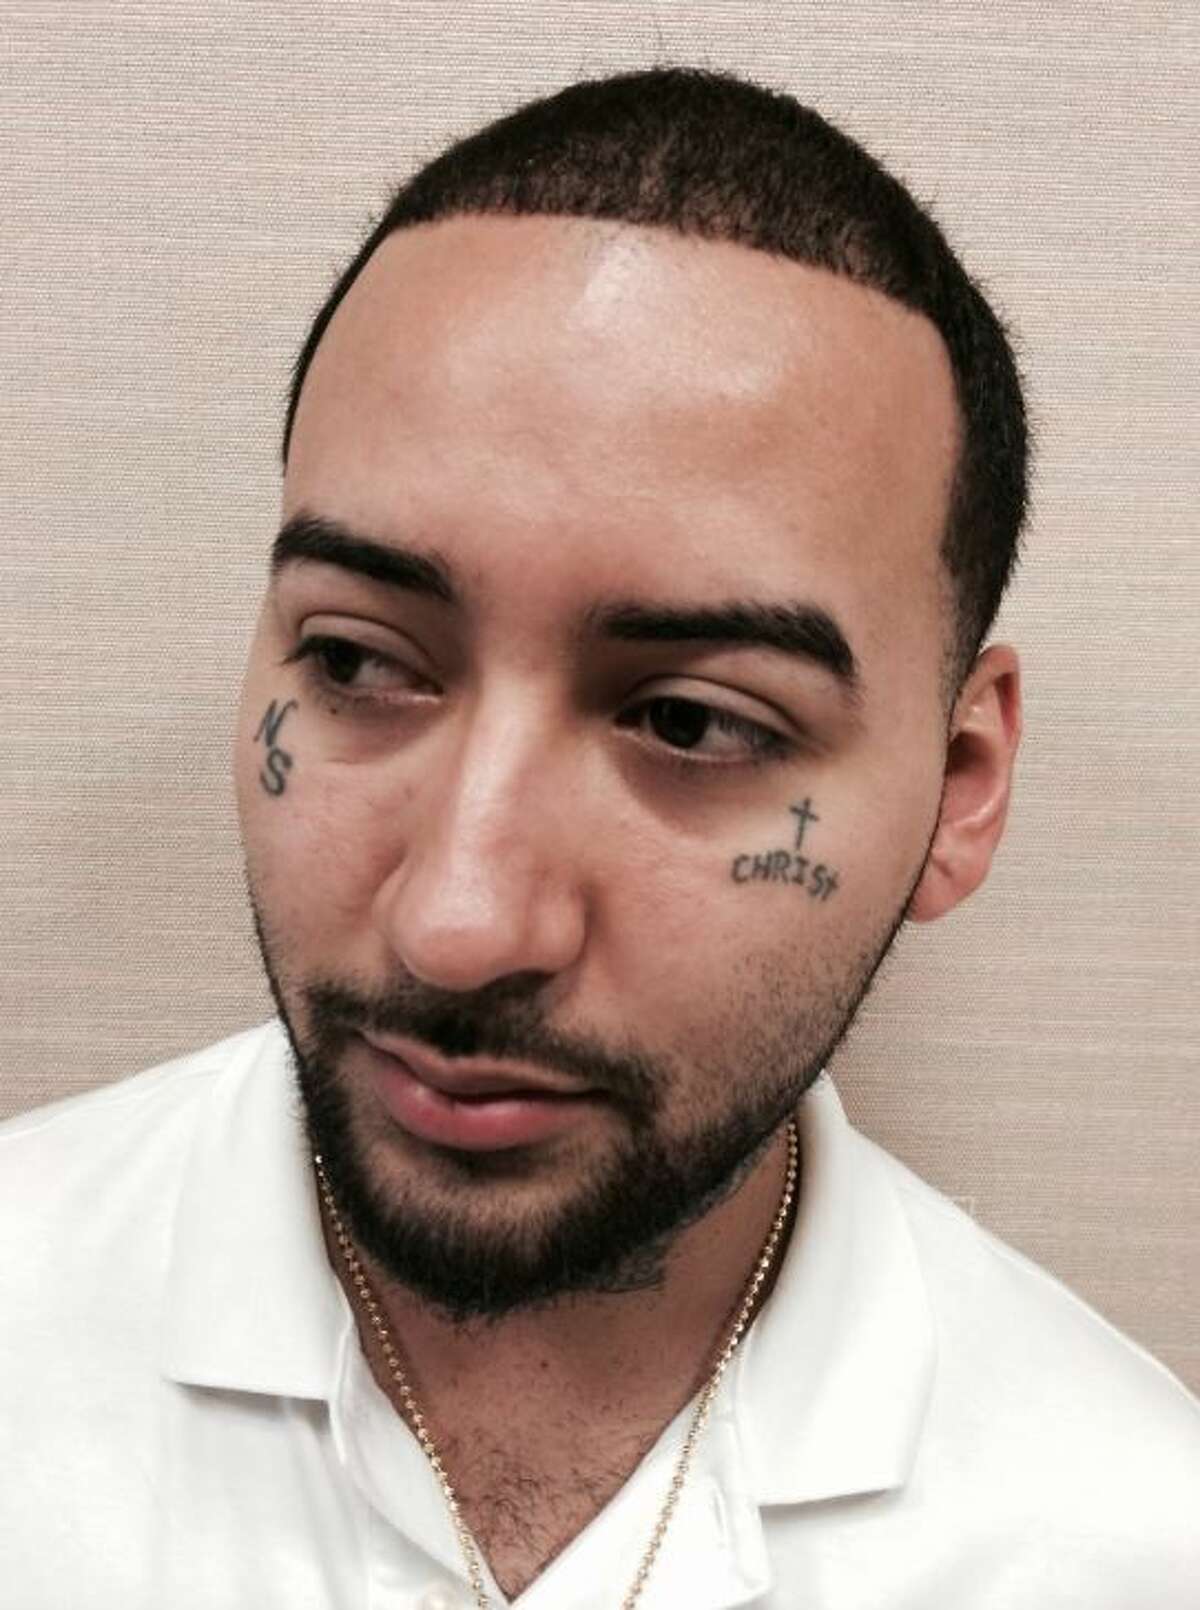 “NS” for North Shore, Jaime goes by “Young Don” & says he doesn’t claim any gang,  according to Houston Chronicle reporter Brian Roger's website, FaceTattooArmy. >>> Click through to see more tattoos.